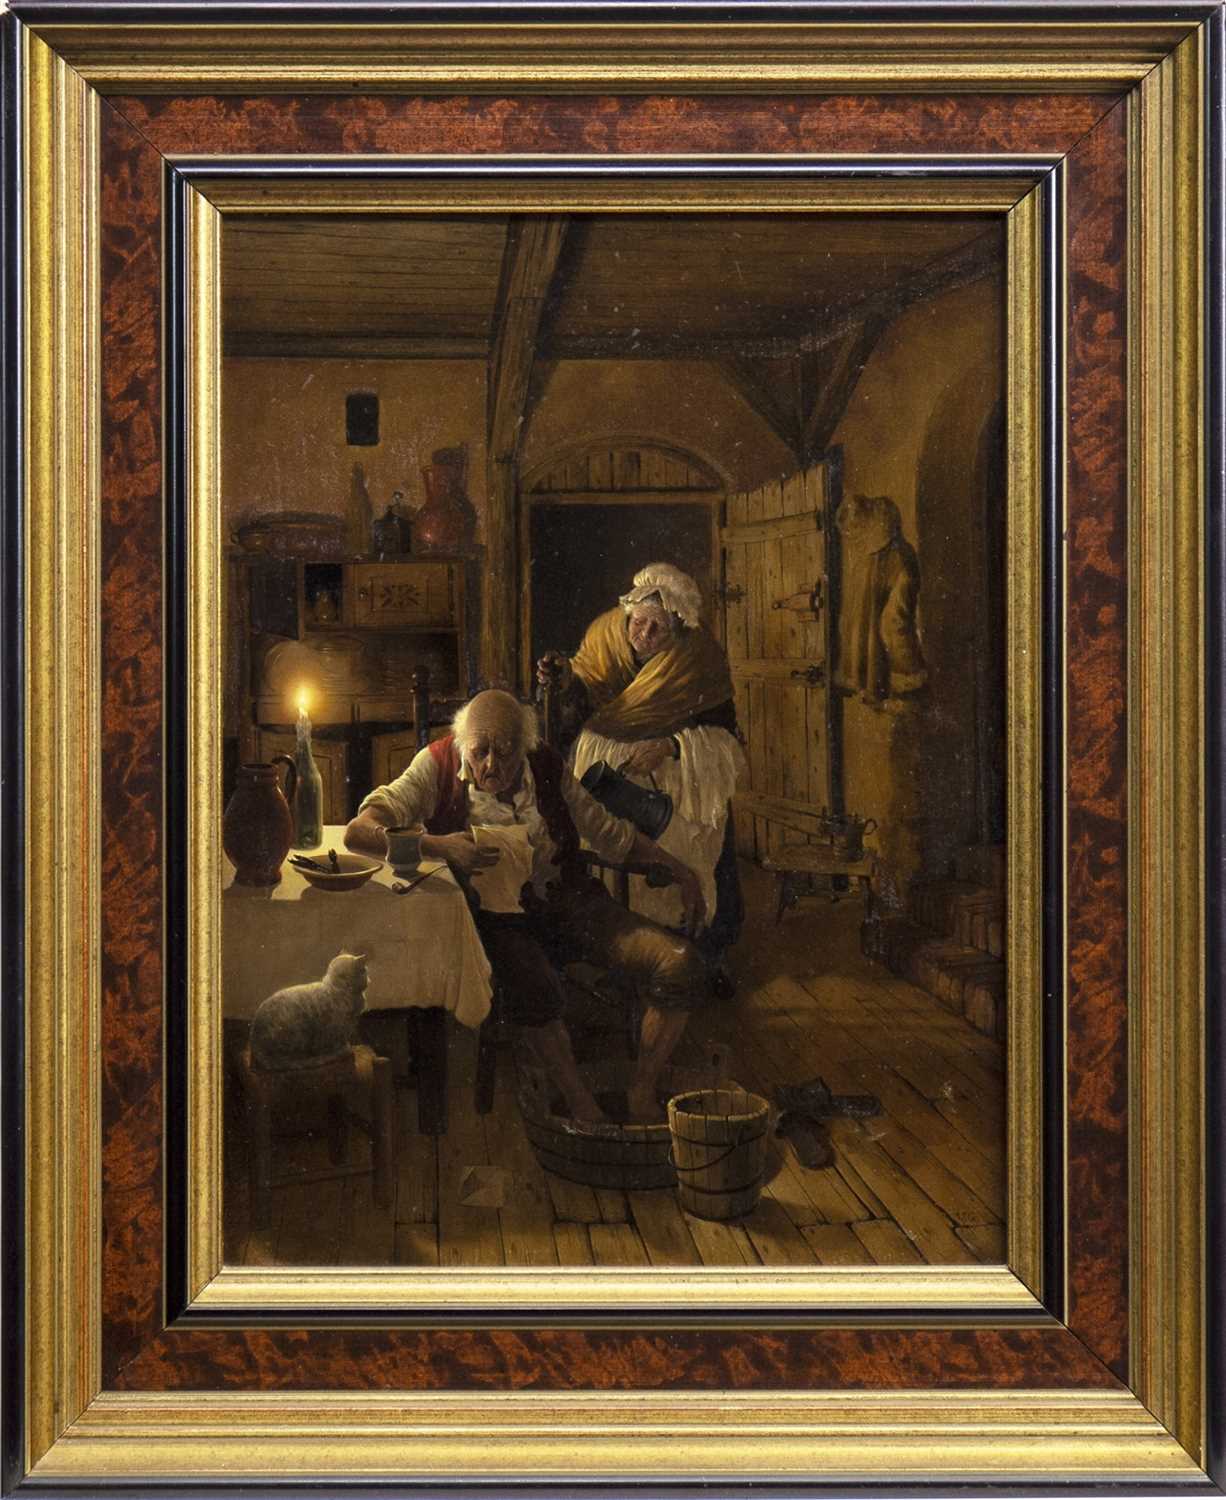 Lot 498 - ELDERLY COUPLE BY CANDLELIGHT, AN OIL